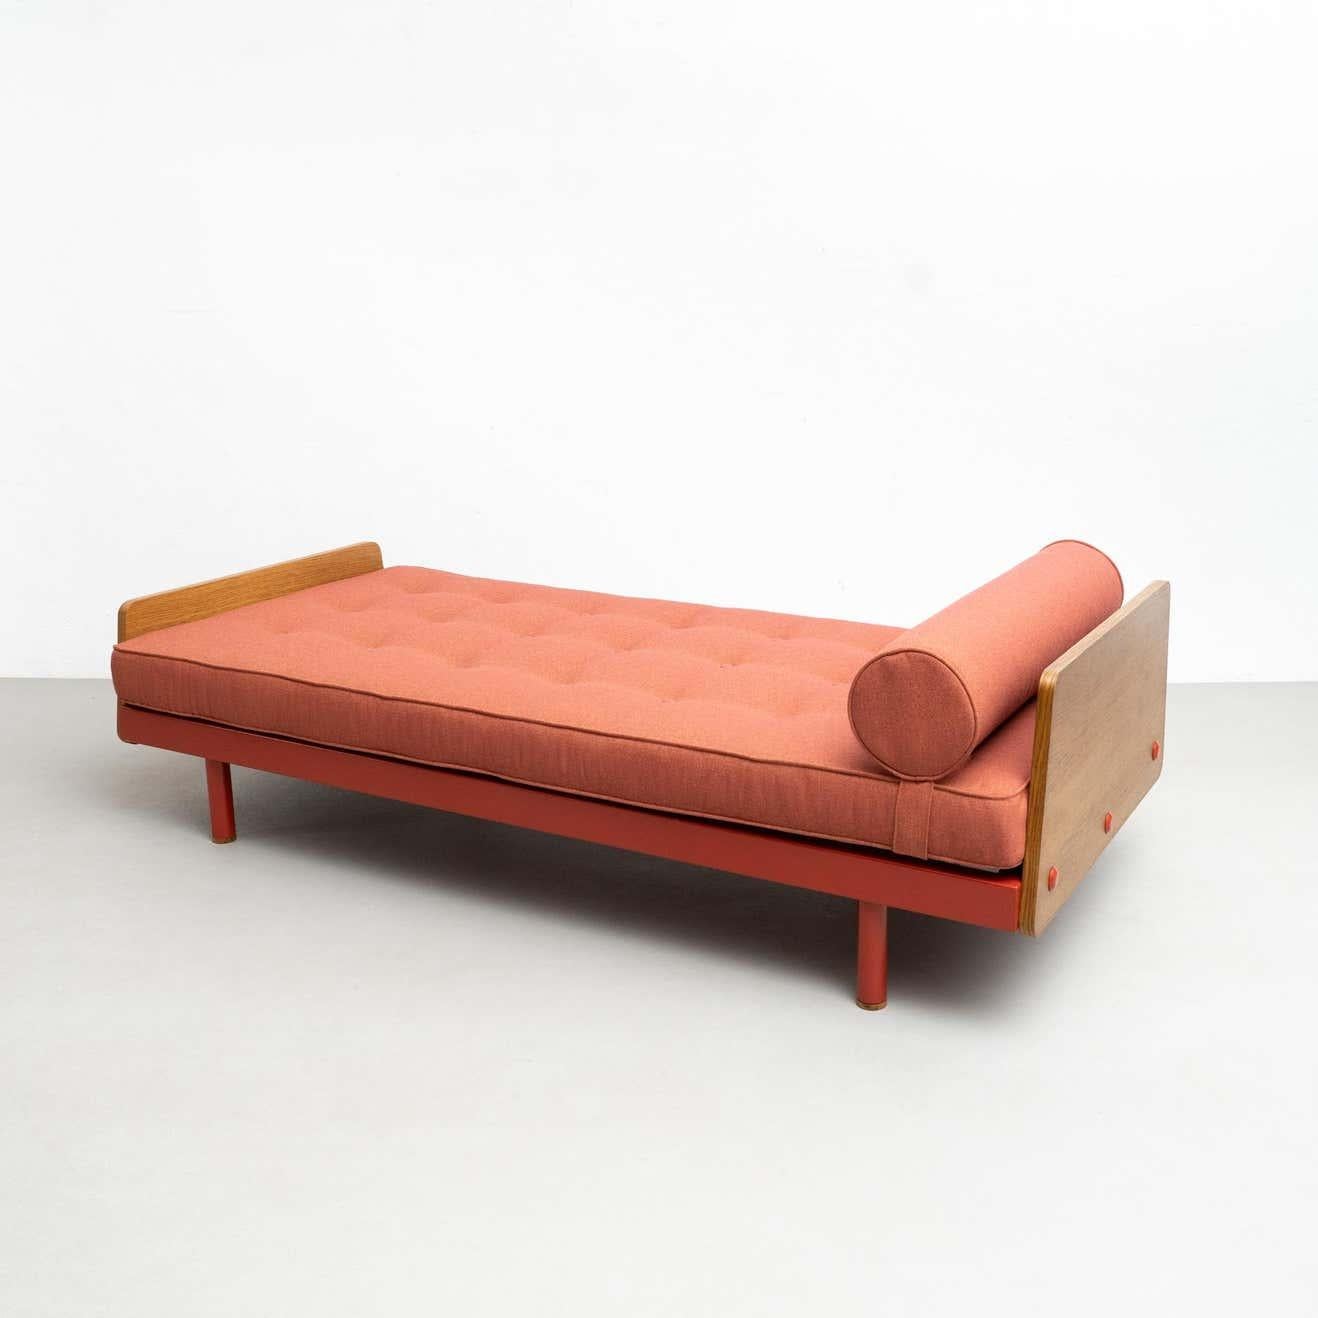 Jean Prouve Mid-Century Modern S.C.A.L. Daybed, circa 1950 6